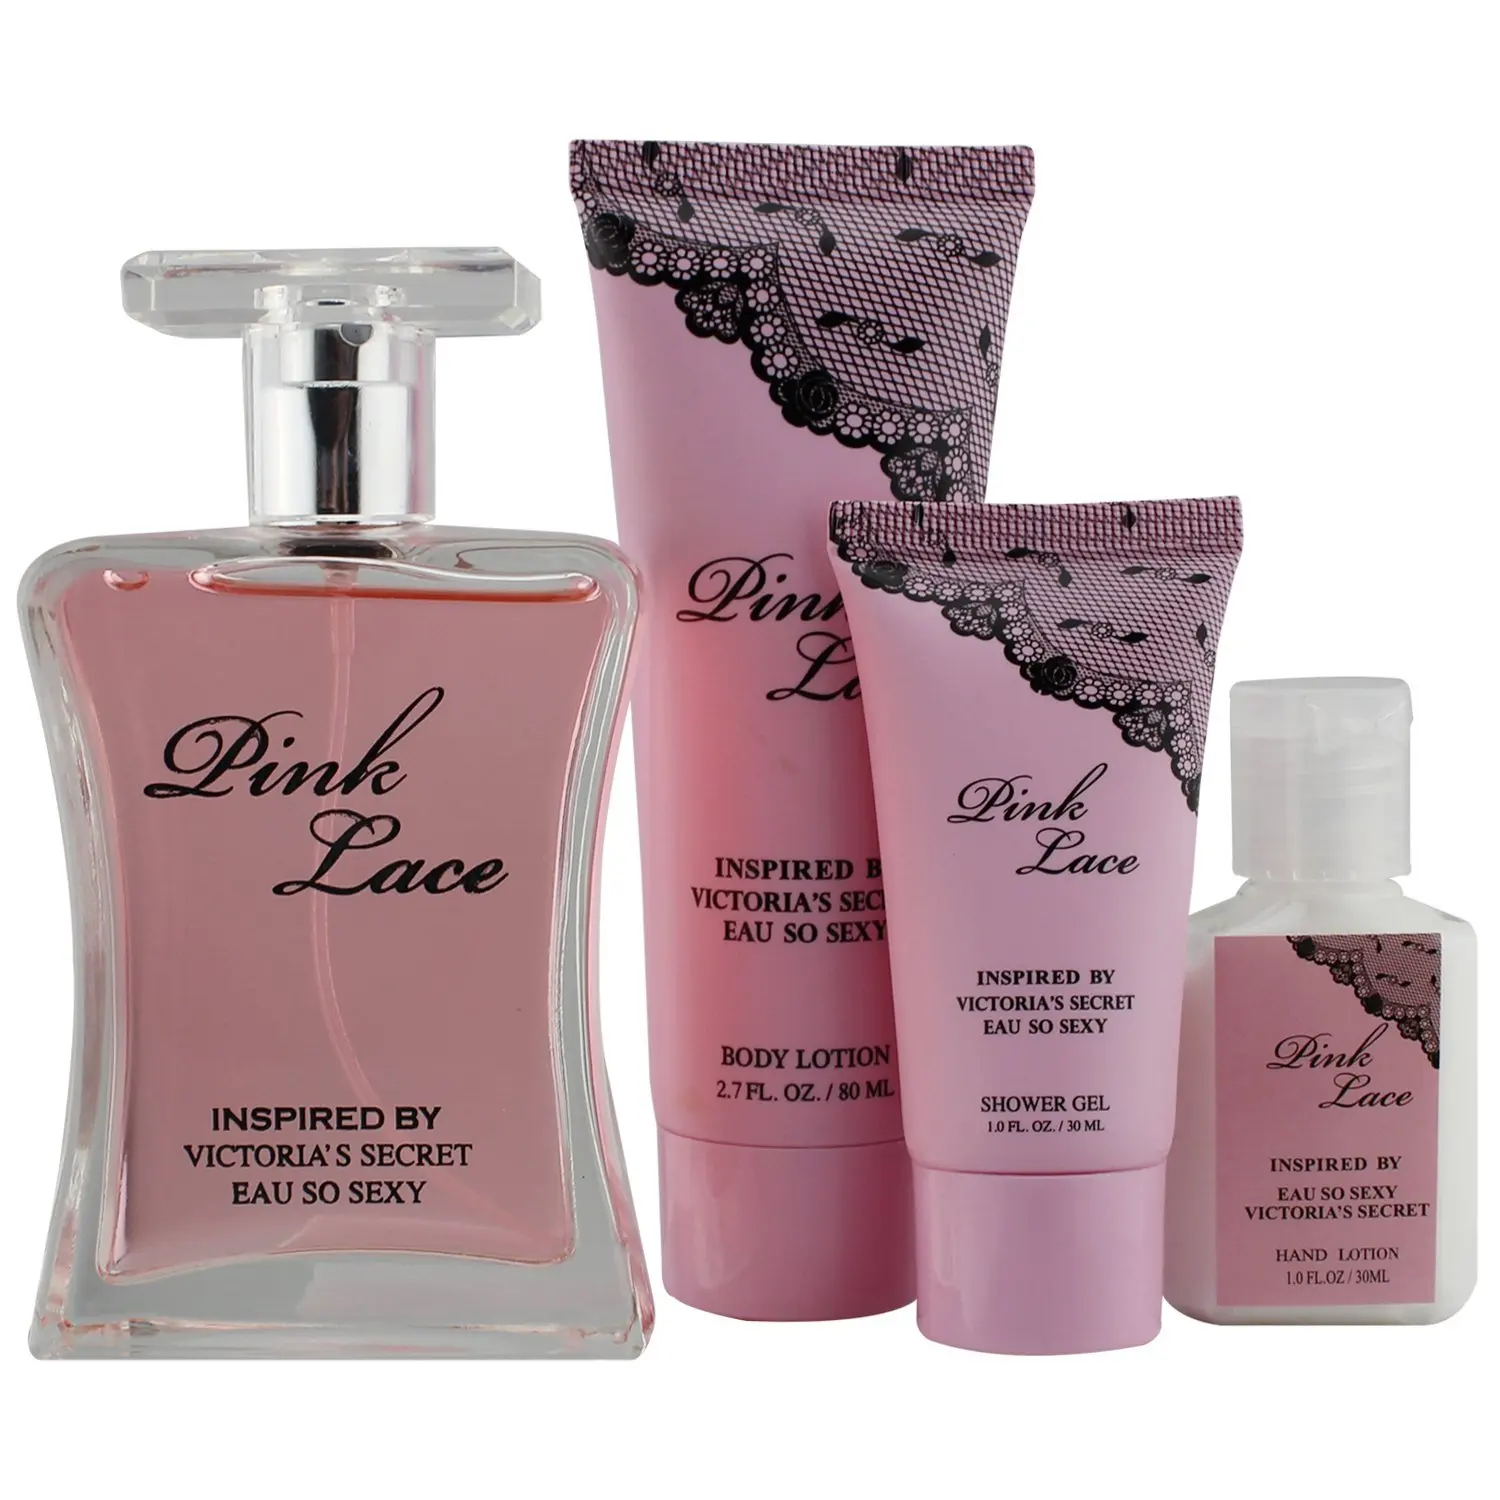 Buy Pink Lace Women’s 4 Piece Fragrance Gift Set, Includes